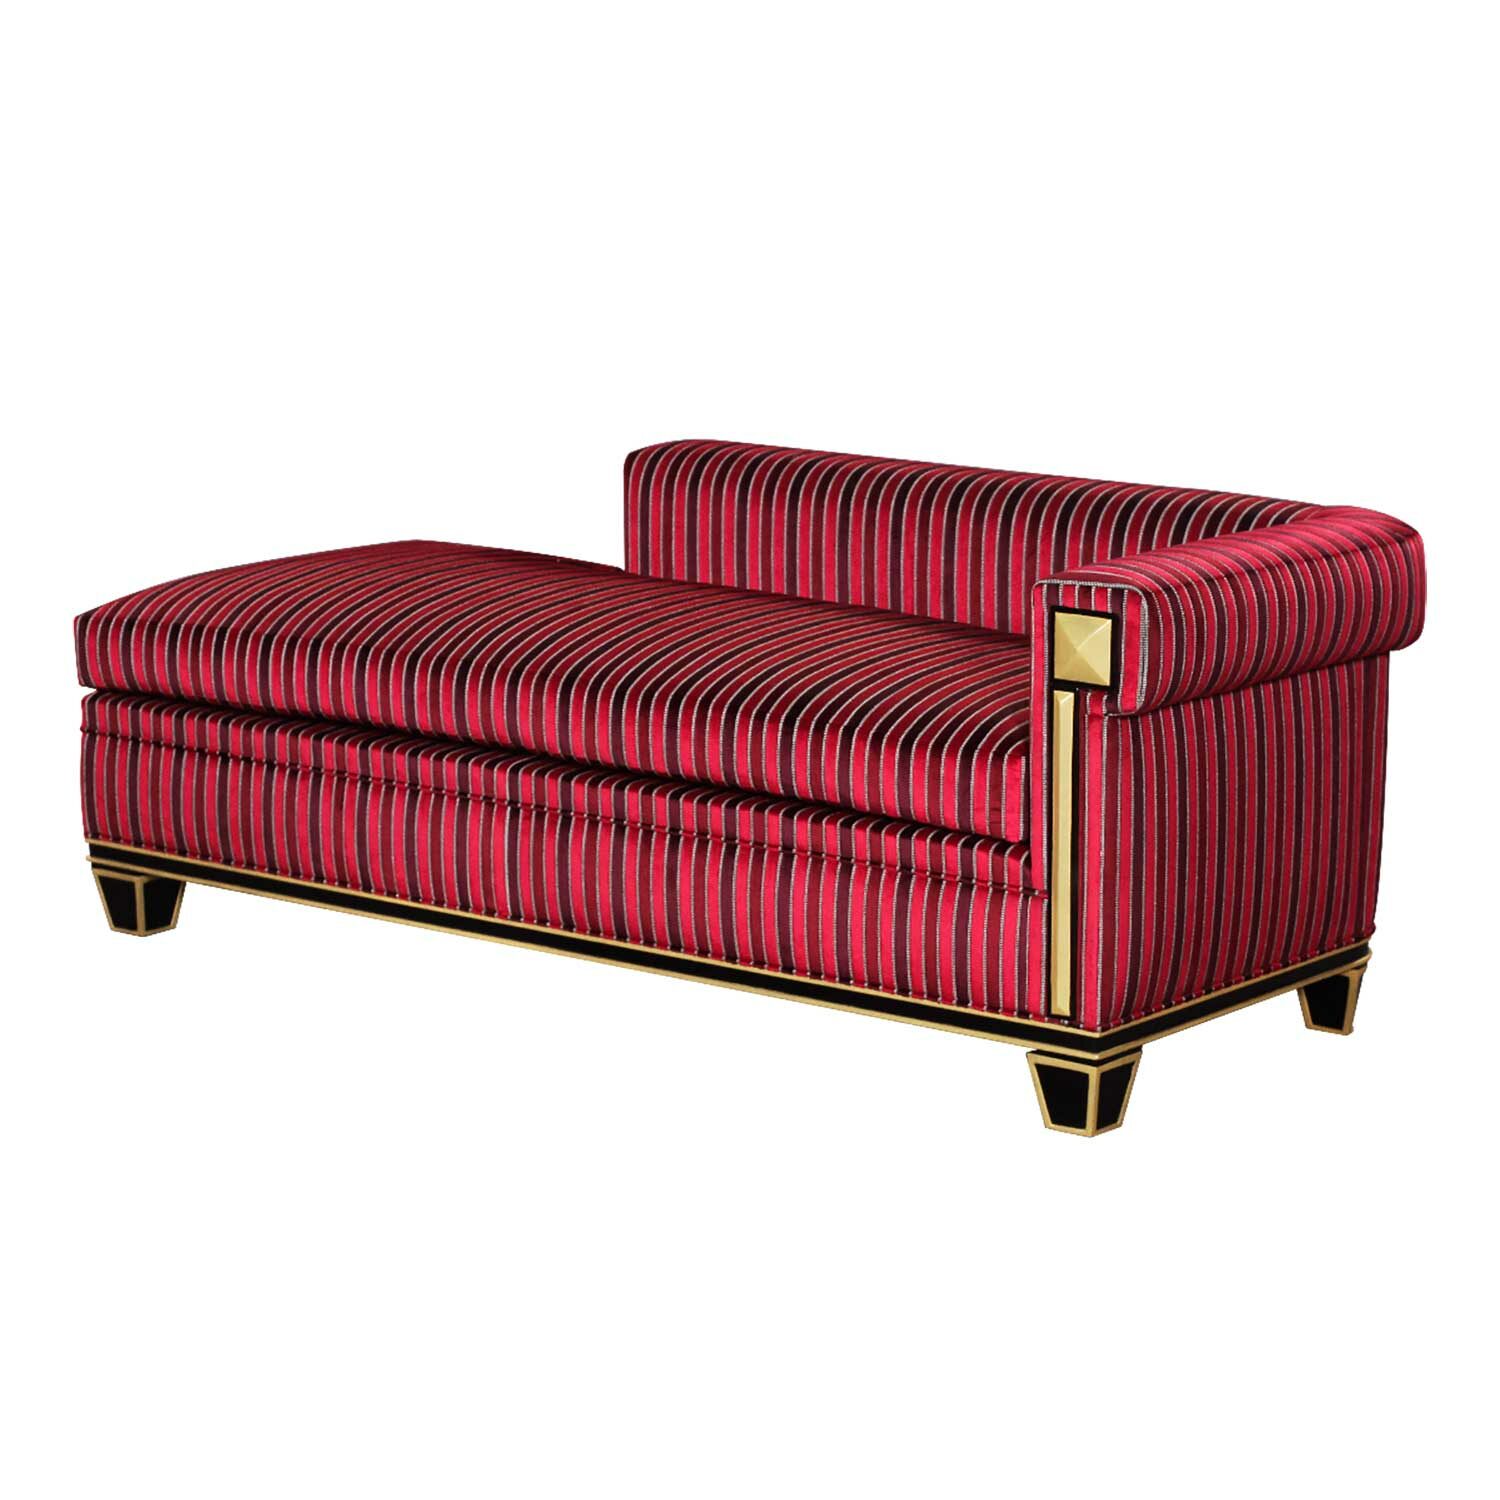 ANUBIS chaise longue red-striped